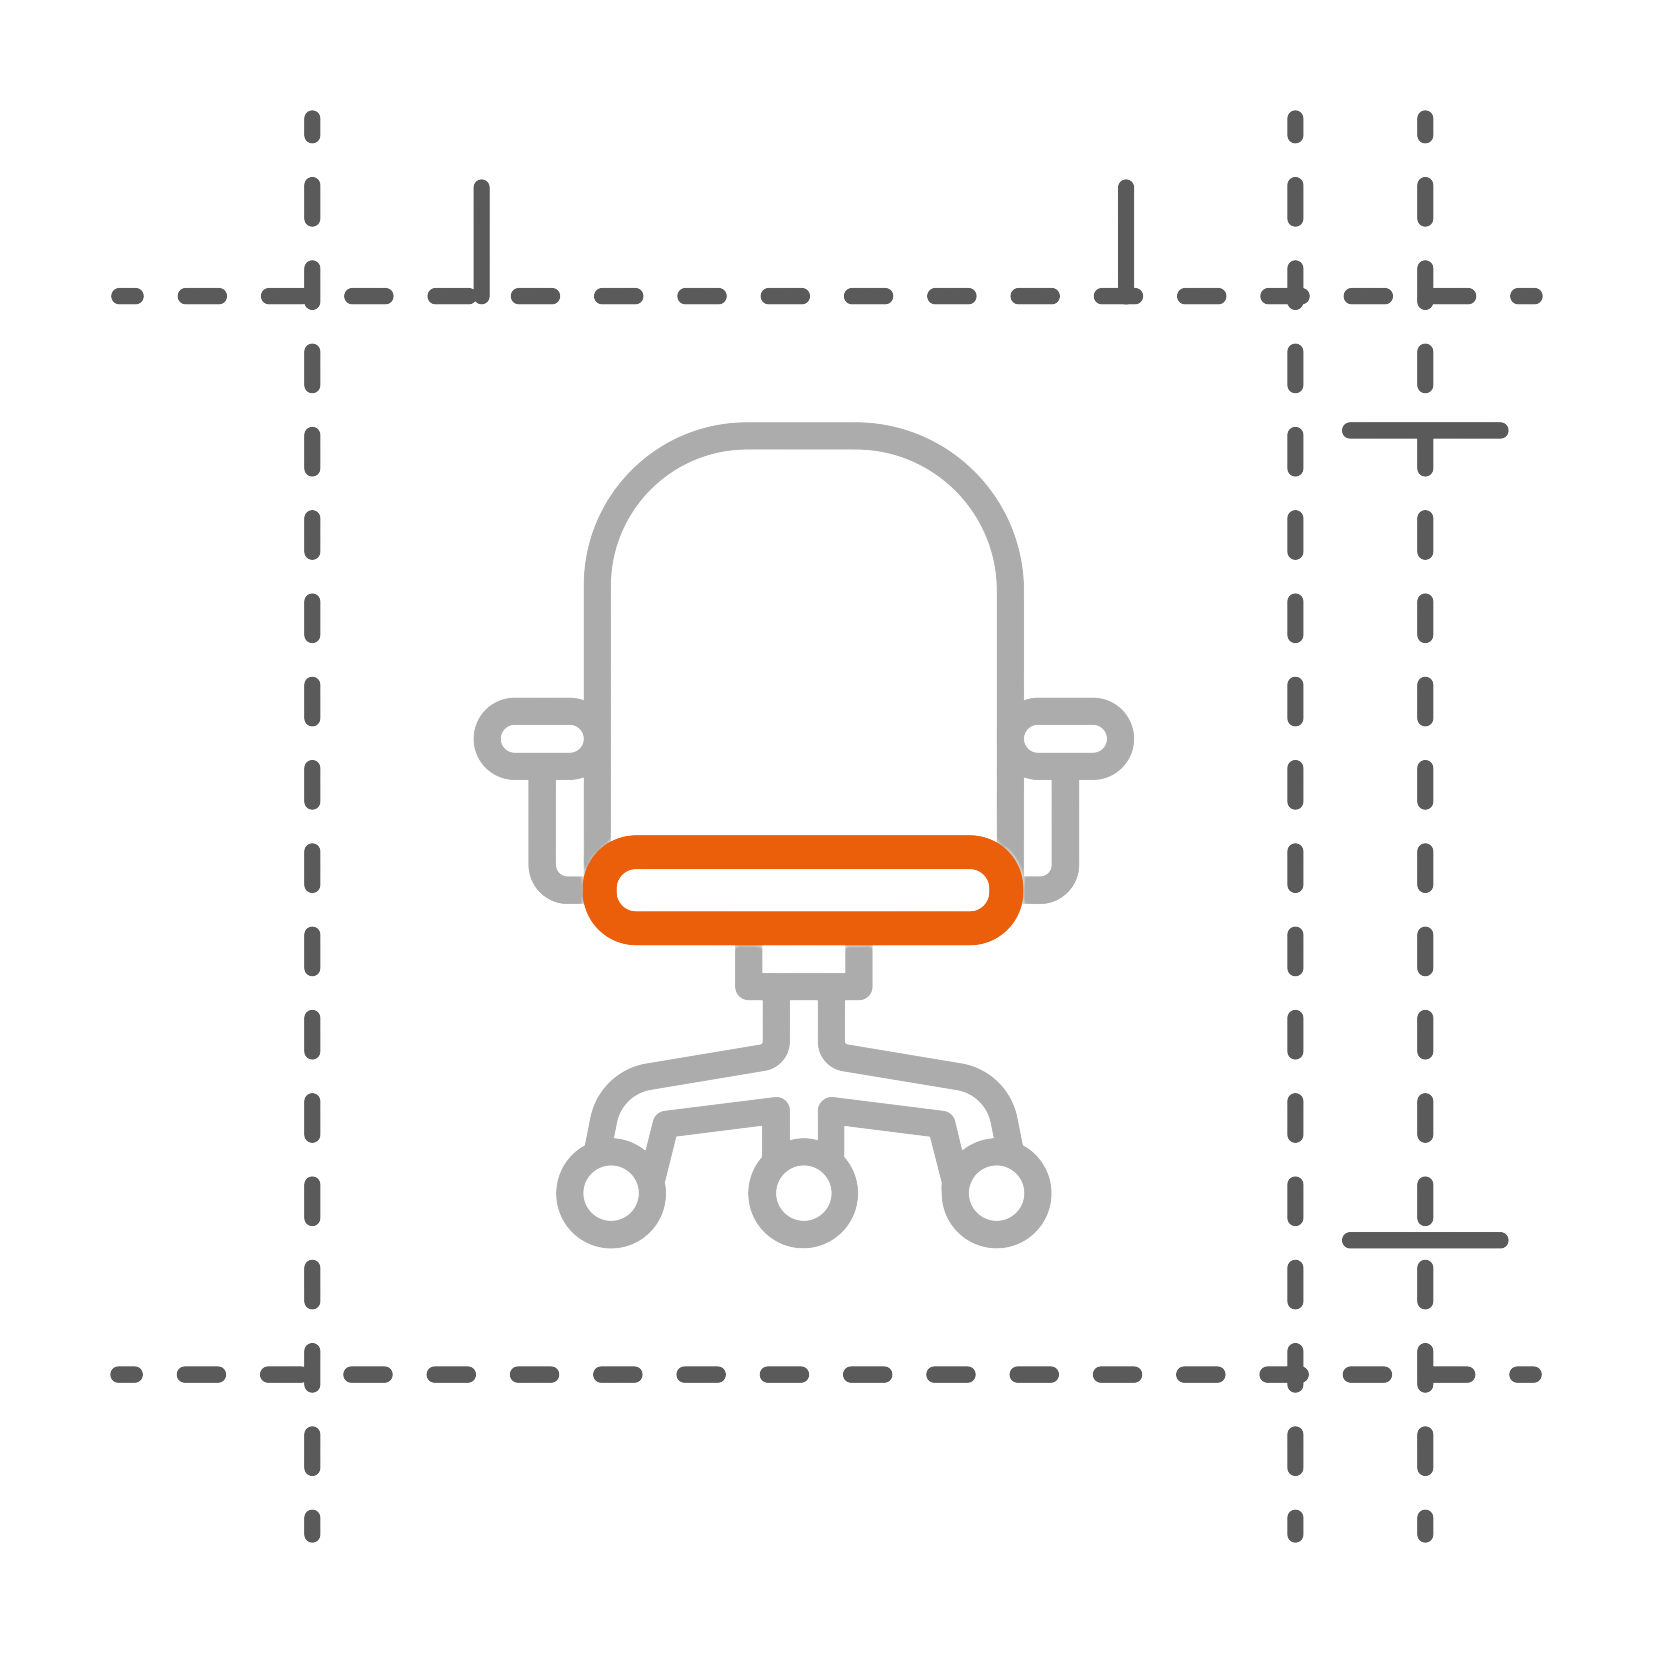 Office Furniture Icon